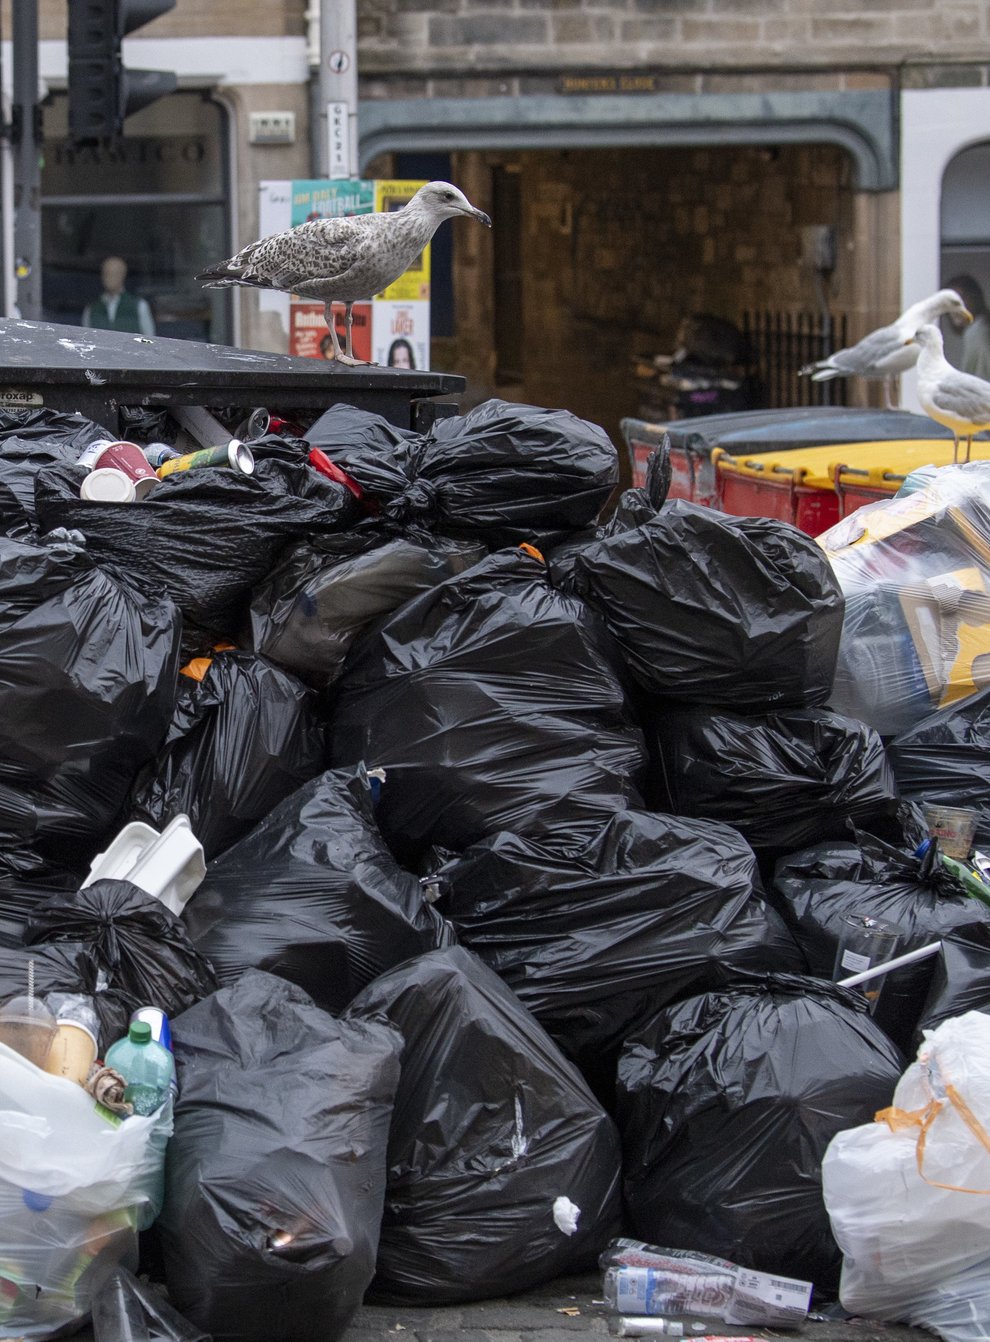 Rubbish piled up on the streets in Edinburgh (Lesley Martin/PA)